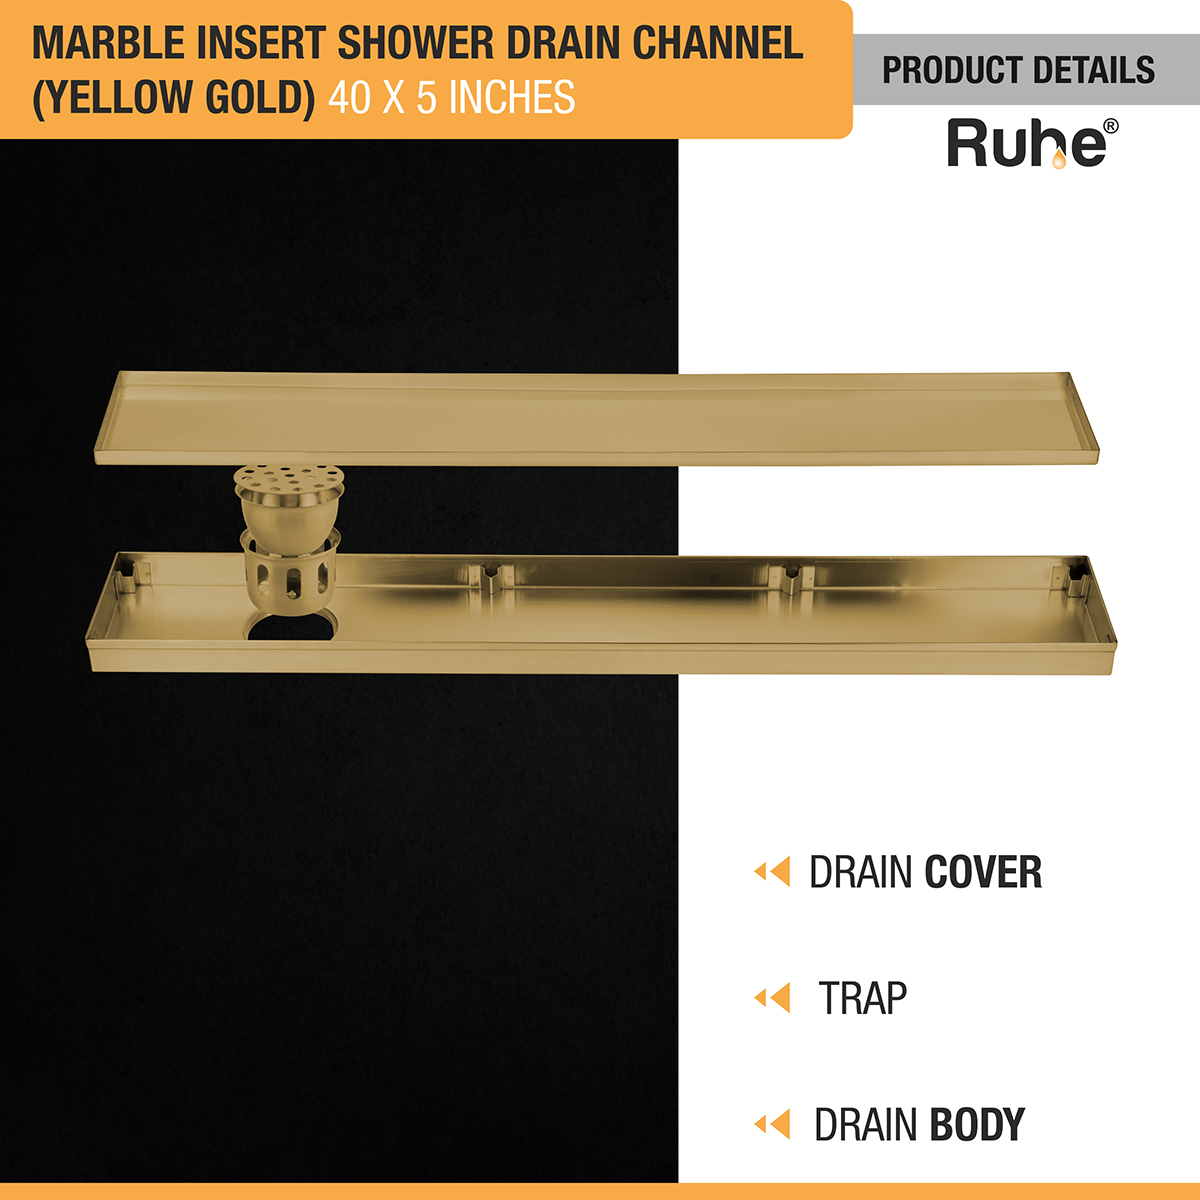 Marble Insert Shower Drain Channel (40 x 5 Inches) YELLOW GOLD PVD Coated with drain cover, trap, and drain body